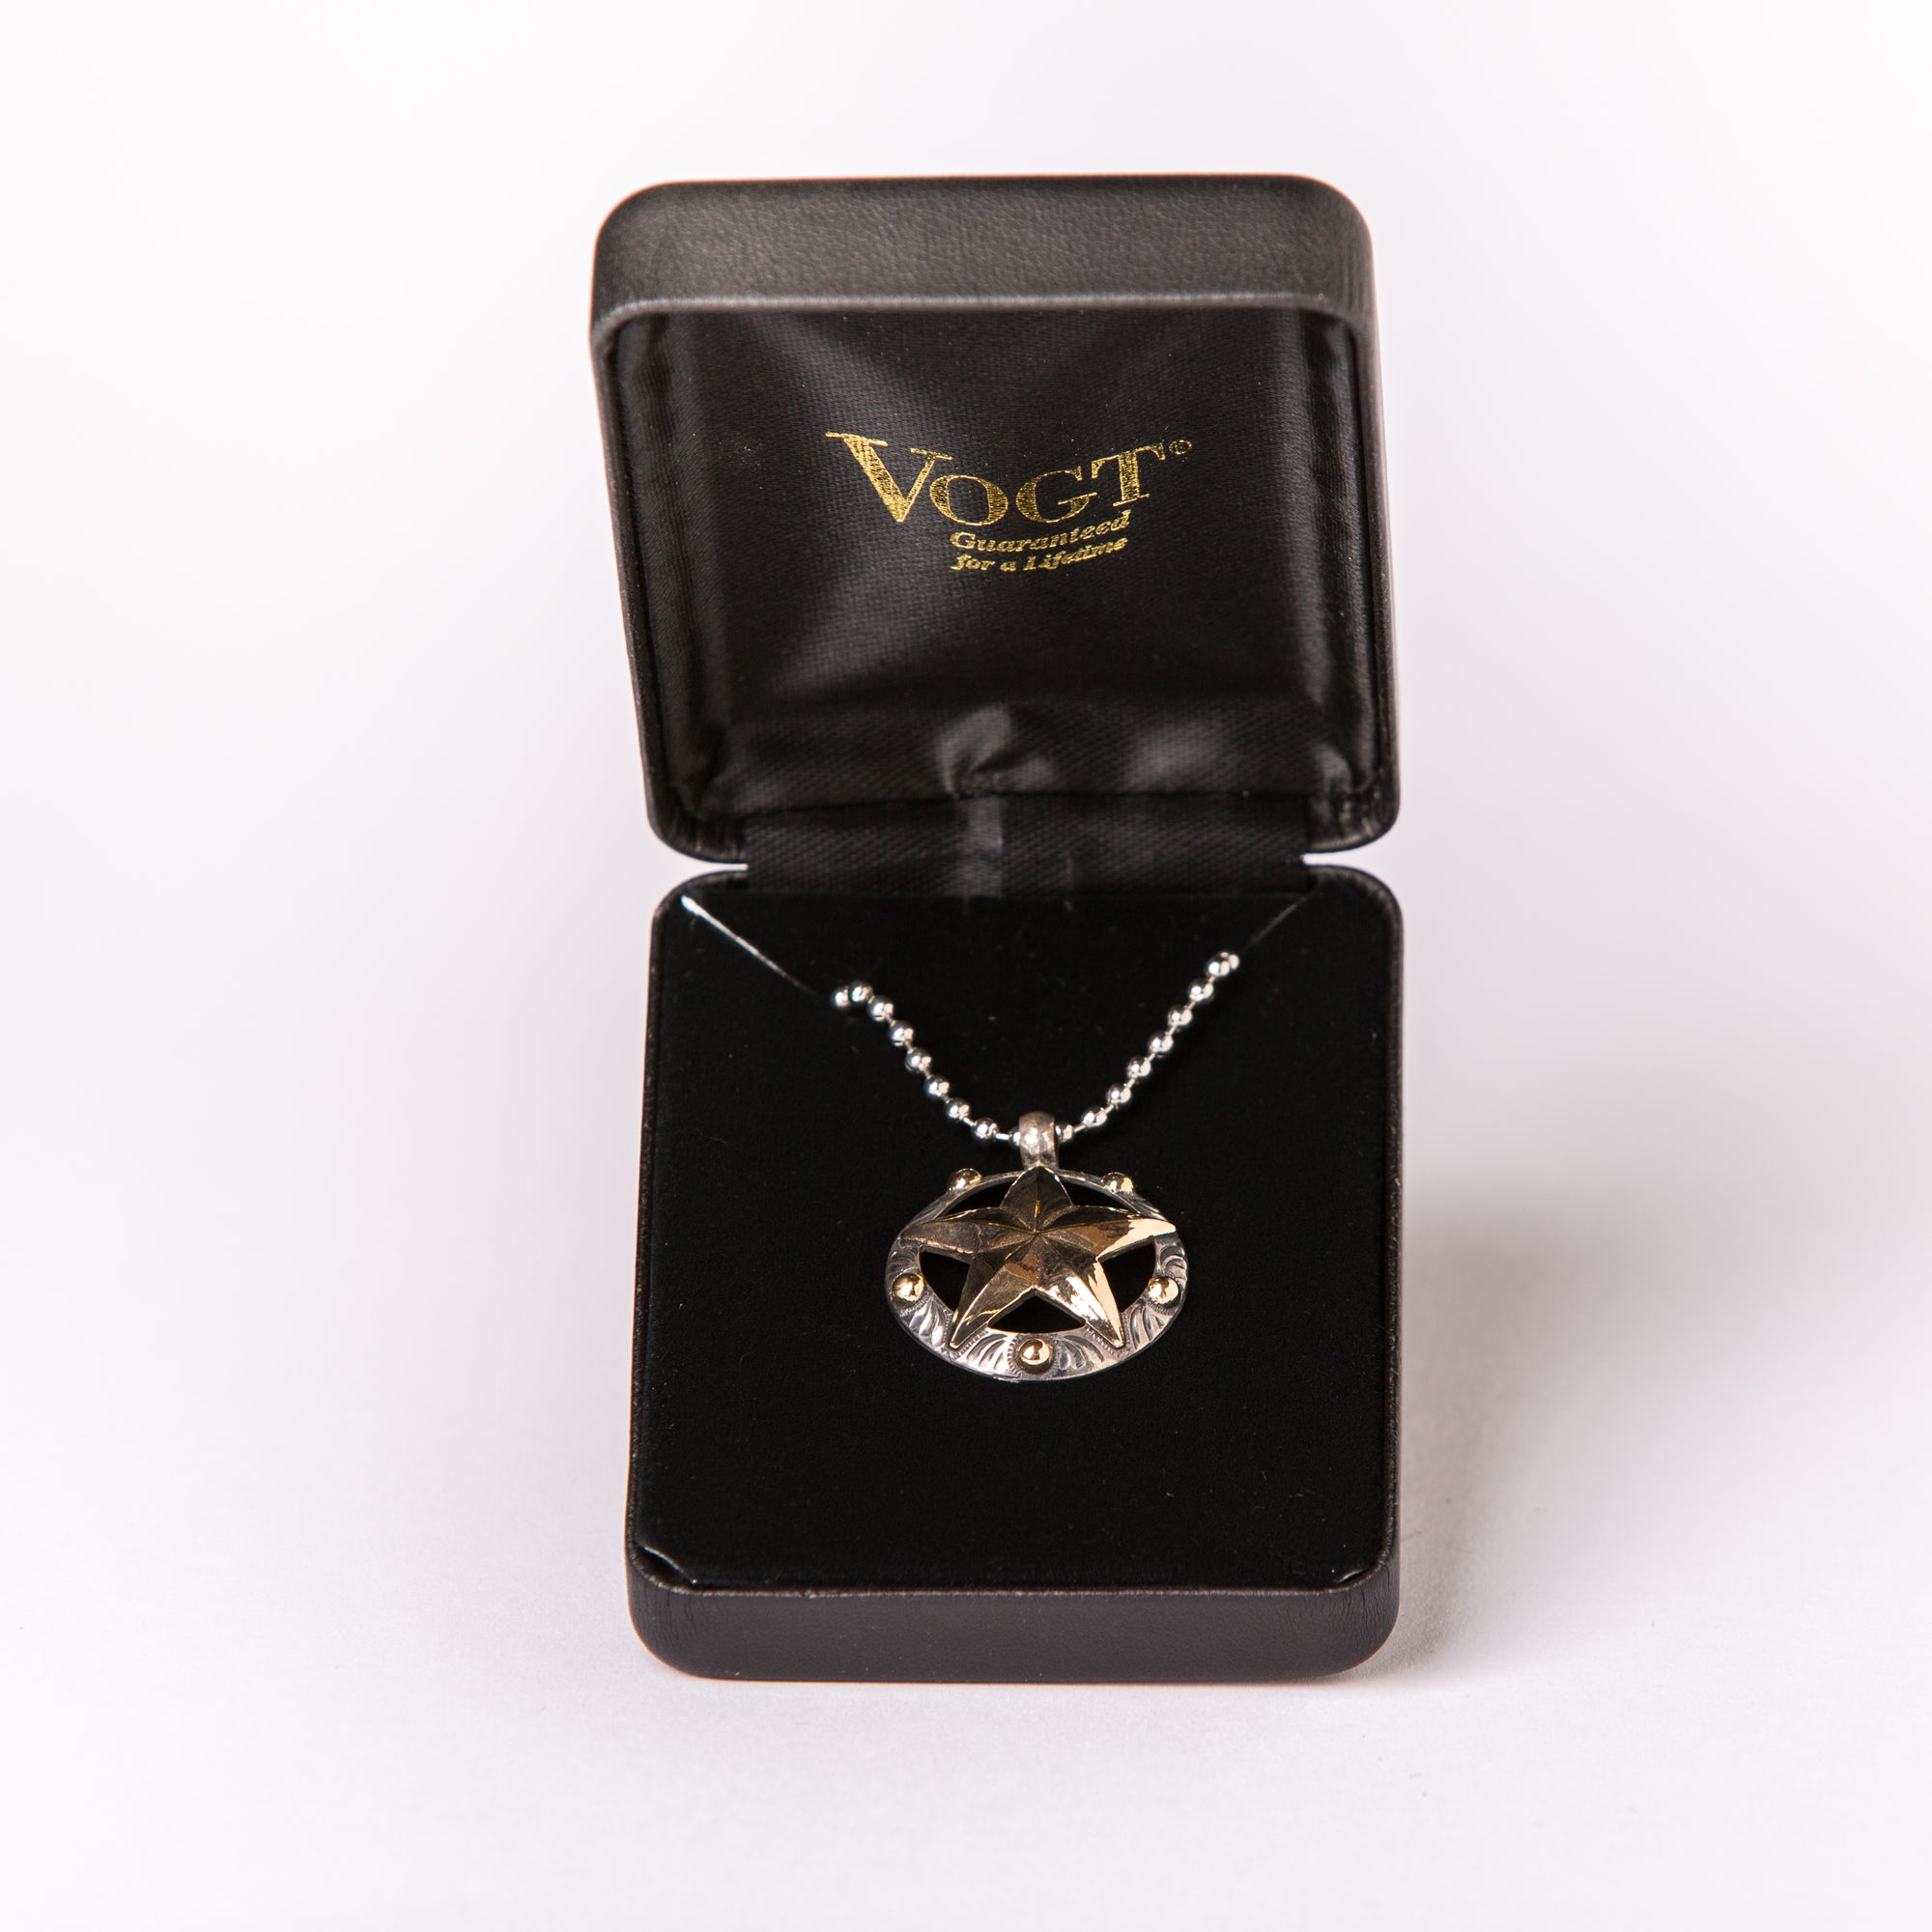 Vogt Sterling Silver and Gold Star Necklace and Pendant